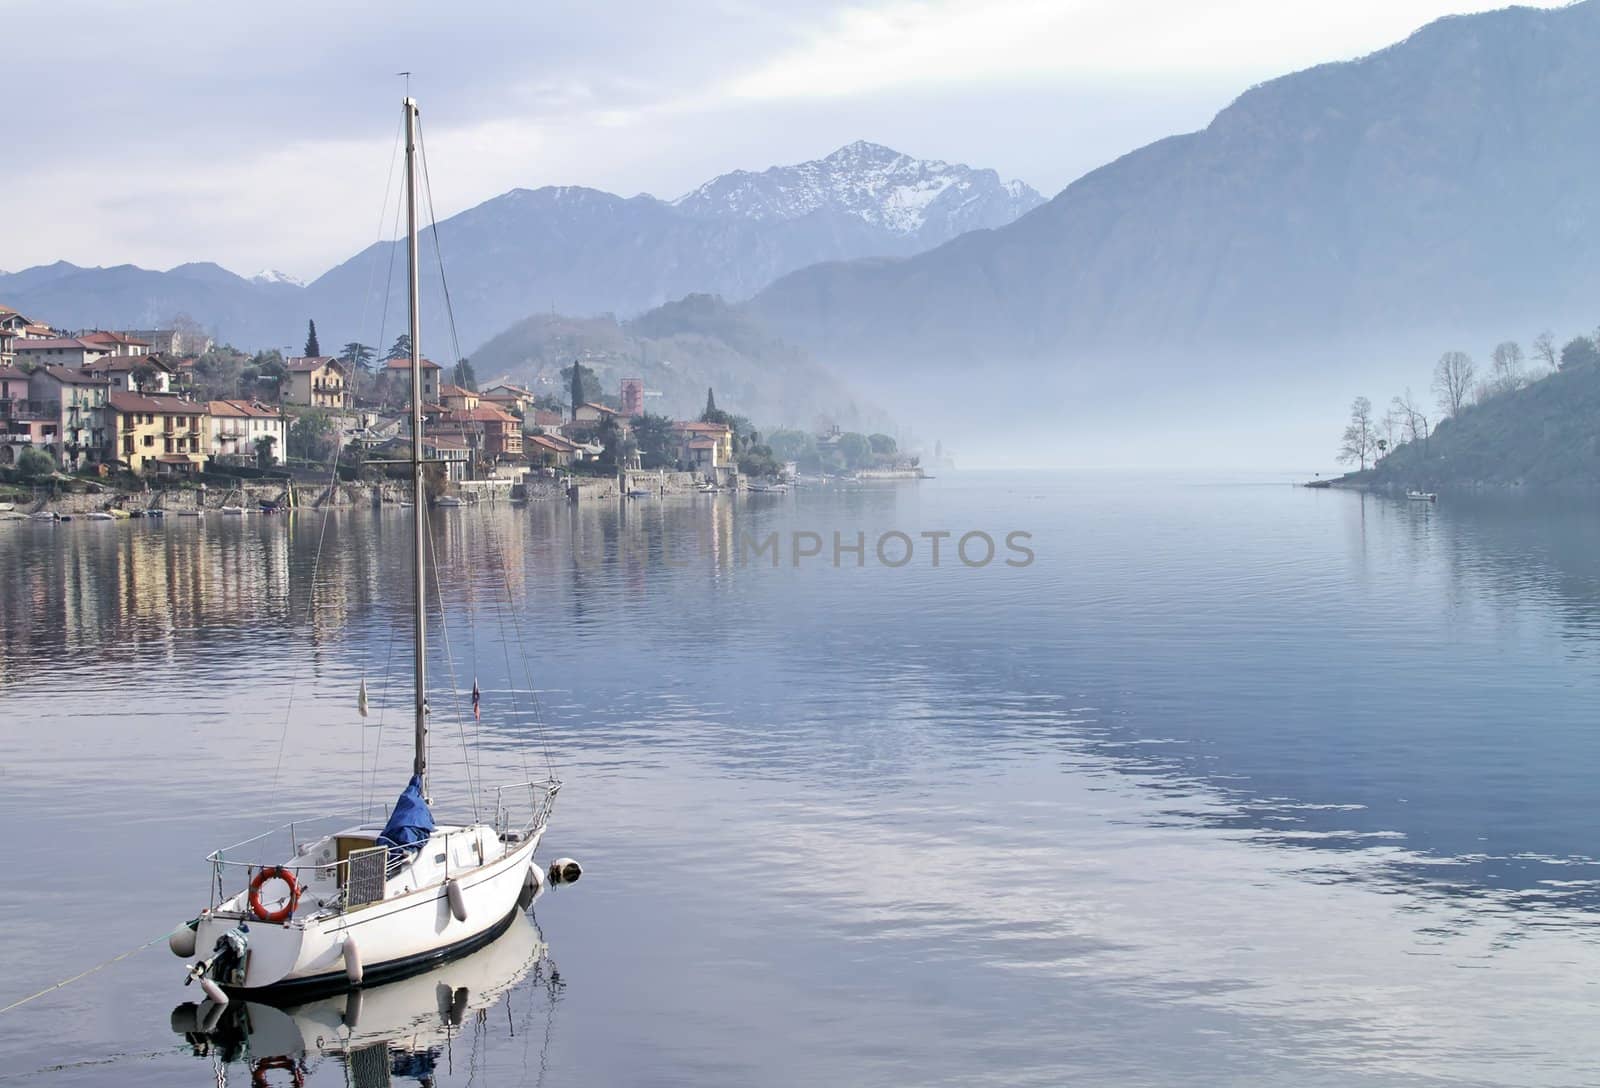 Moored sailboat in cloudy and misty day (horizontall) - Como Italy by Laborer